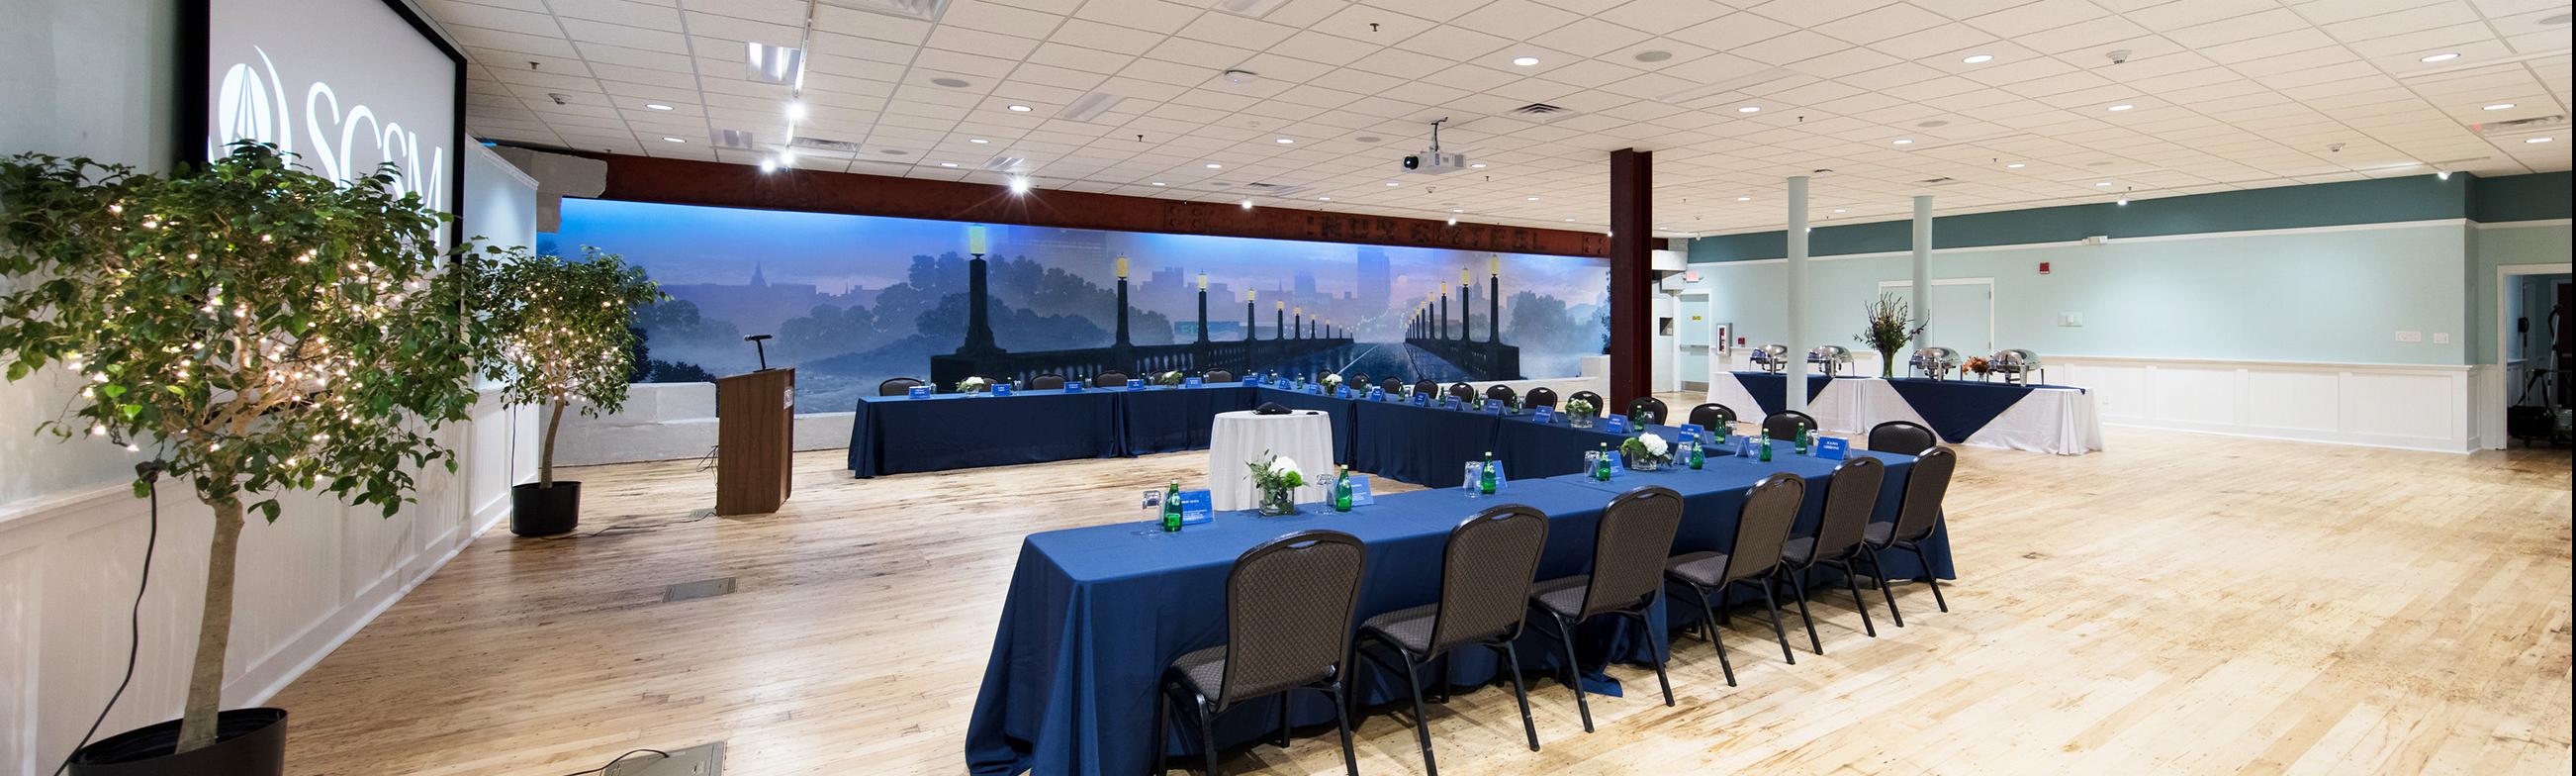 Large room with light colored wooden floor has table set up in u shape facing a large screen on the wall with mural of bridge in the background